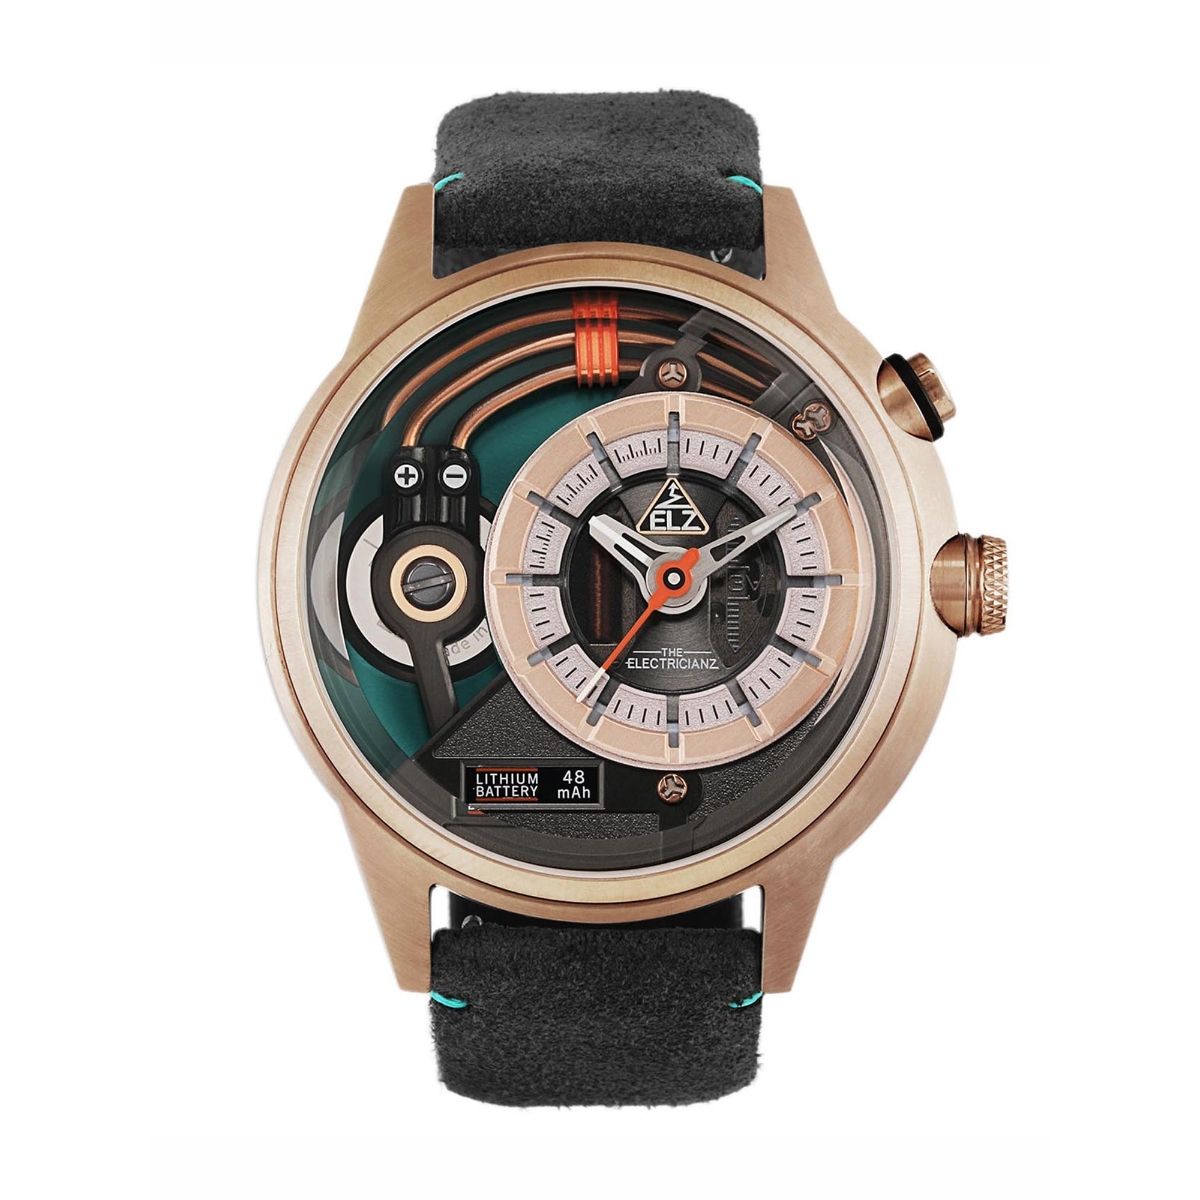 The Electricianz Carbon Z Black | Cool watches, Stylish watches men, Watches  for men